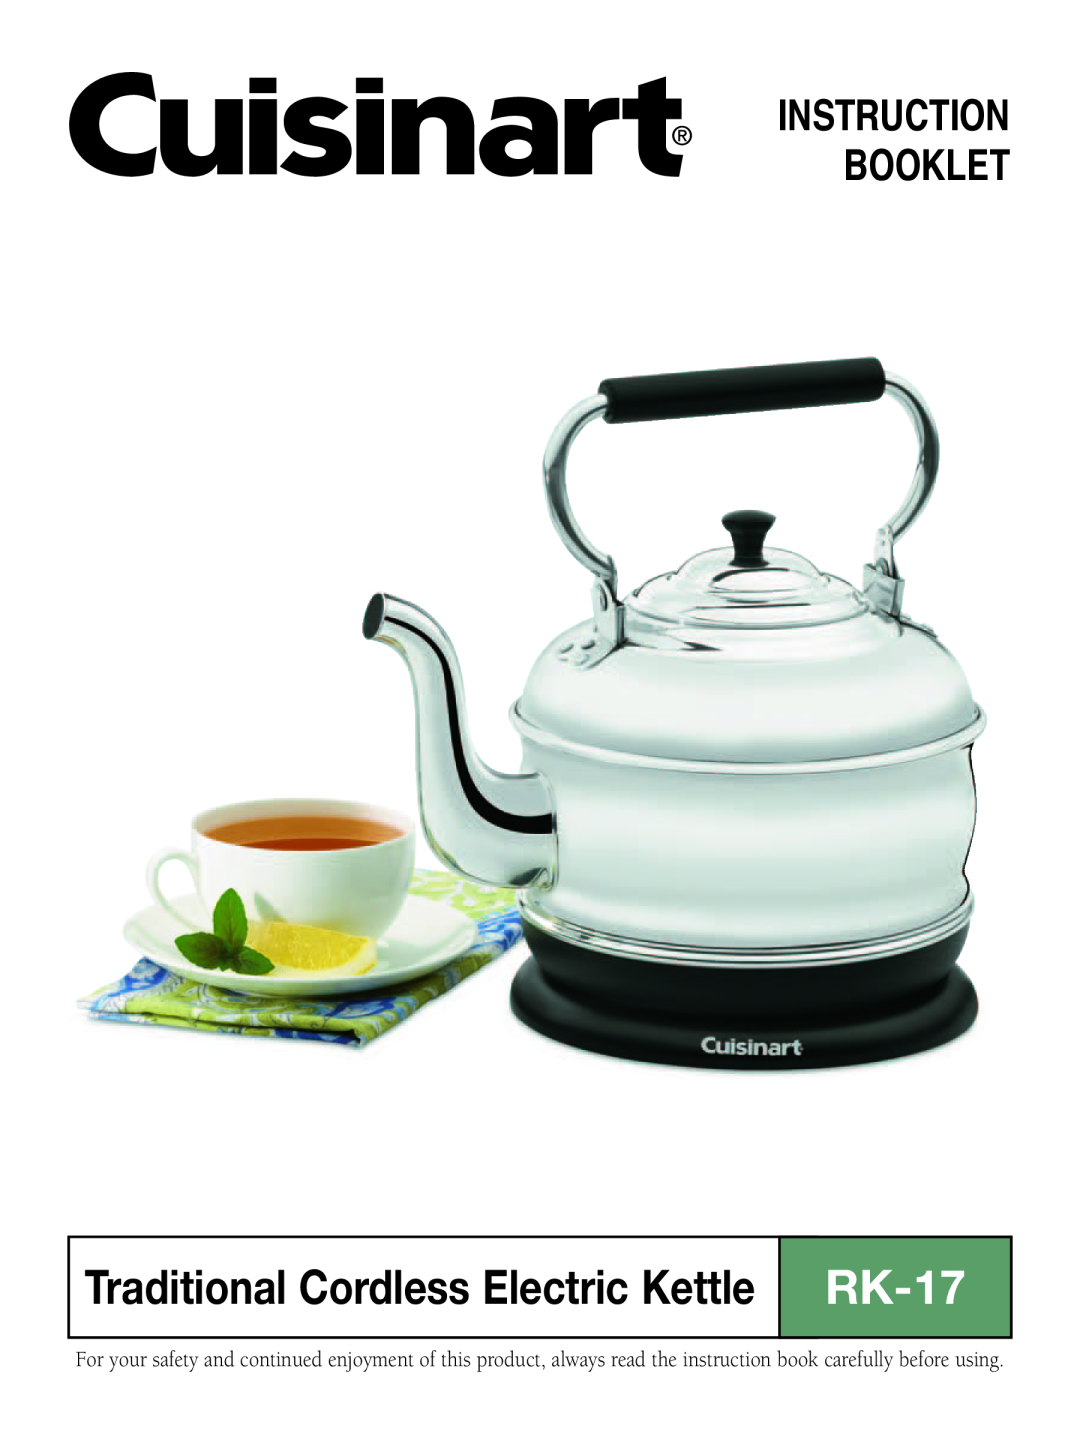 Cuisinart RK-17 manual Traditional Cordless Electric Kettle, Instruction Booklet 